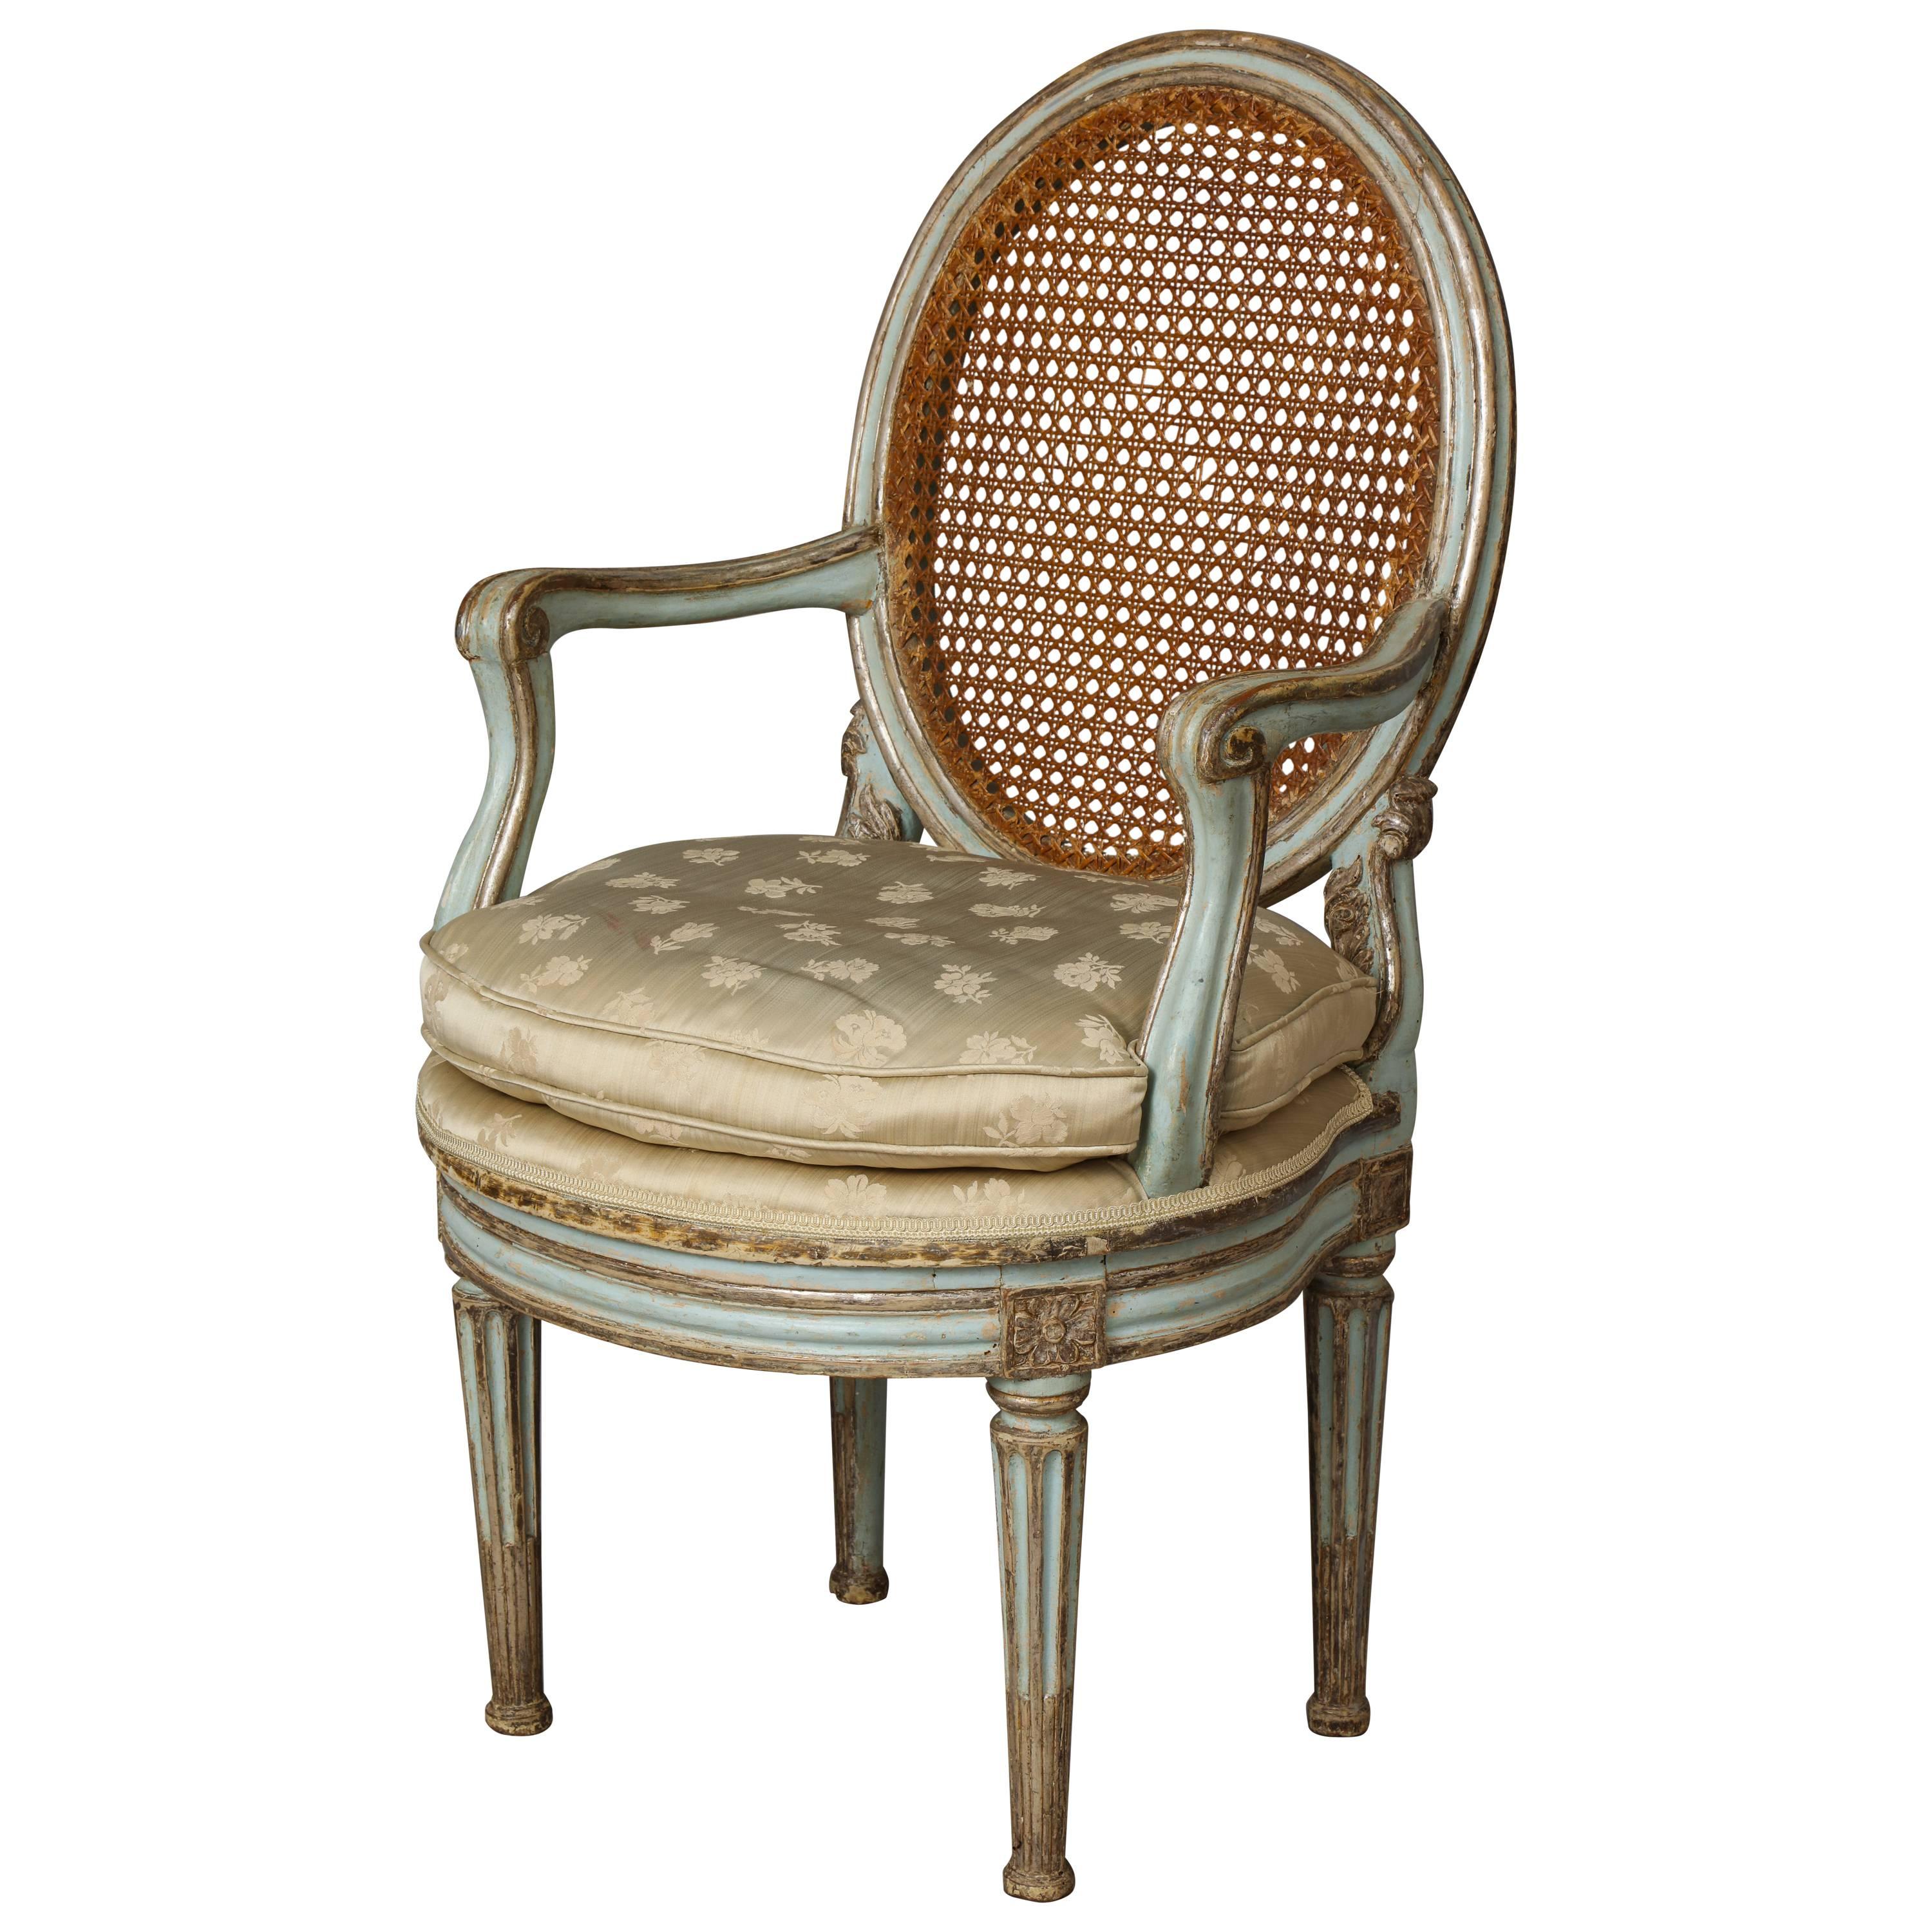 Venetian Neoclassic Painted Armchair with Oval Caned Back